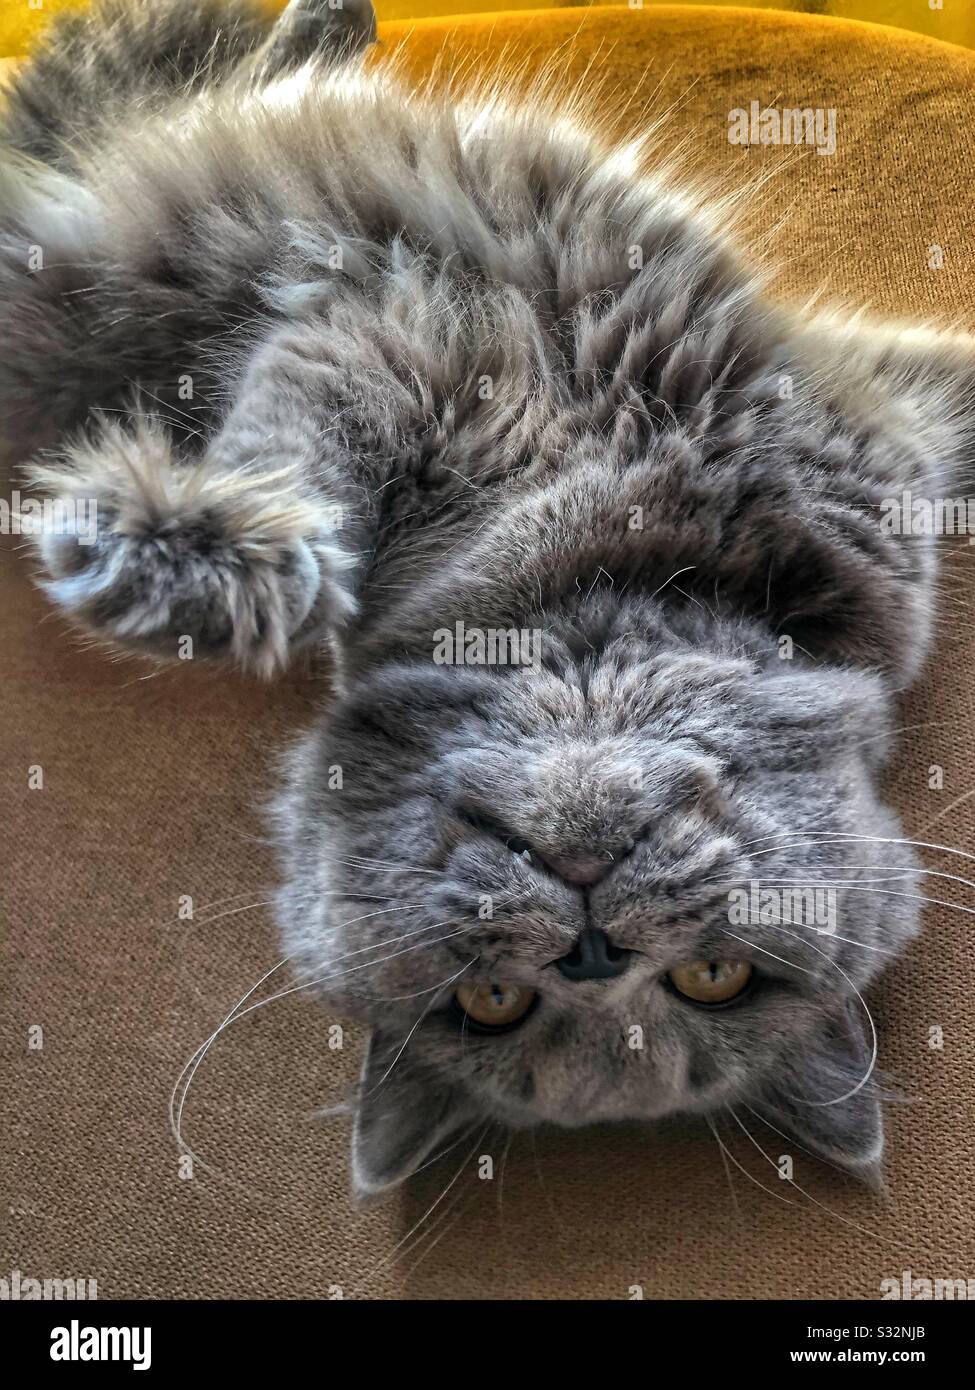 British grey cat laying down on bed looking upside down Stock Photo